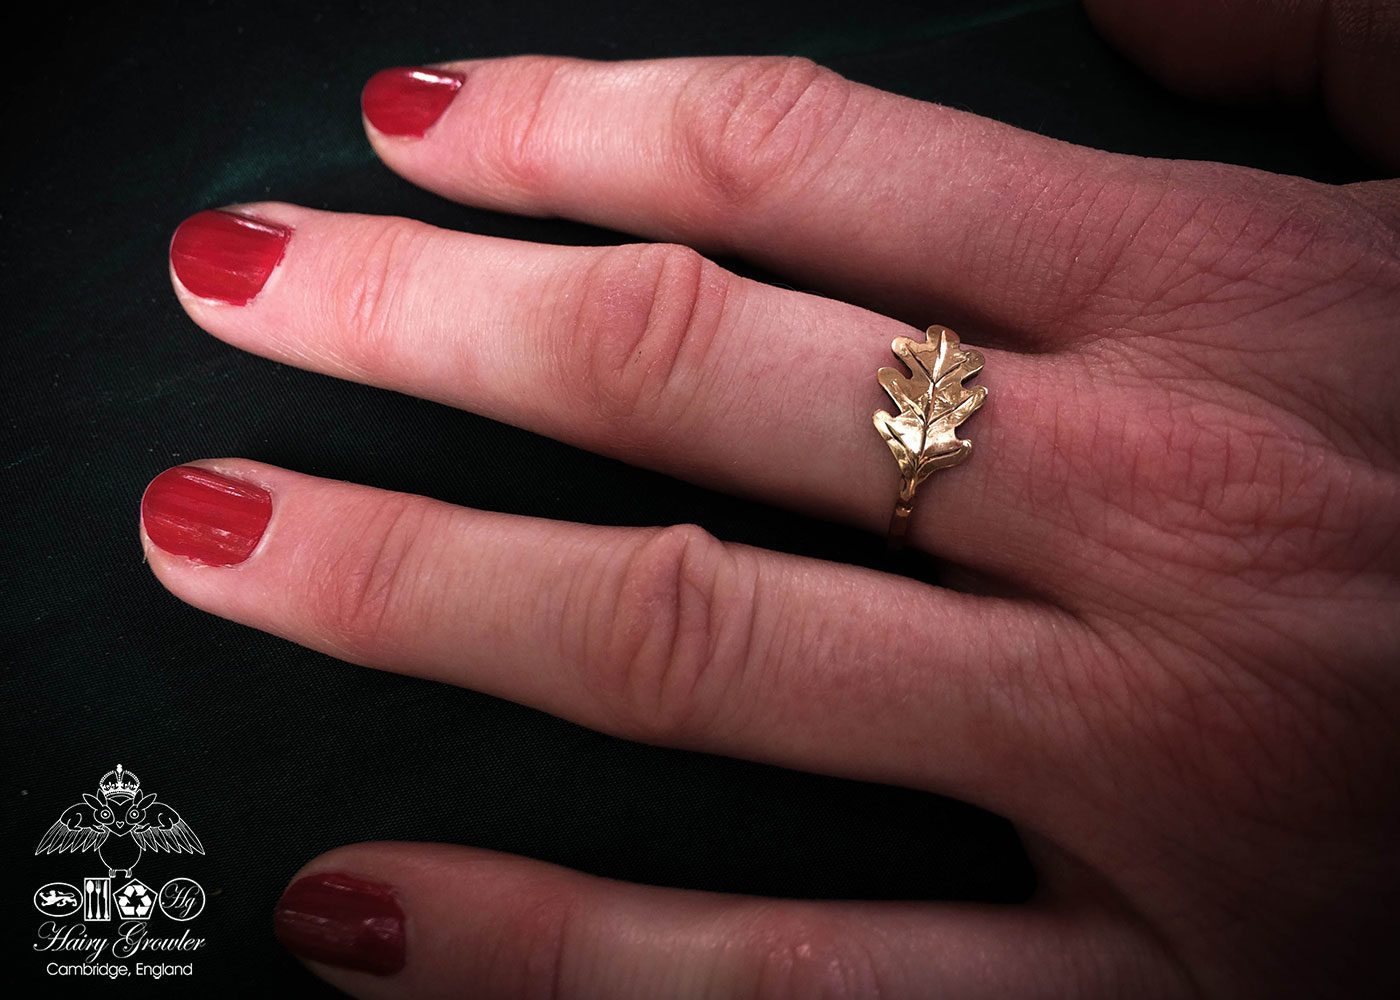 handcrafted and recycled 22ct gold sovereign oak leaf ring. Totally handcrafted and recycled. Unusual and interesting.